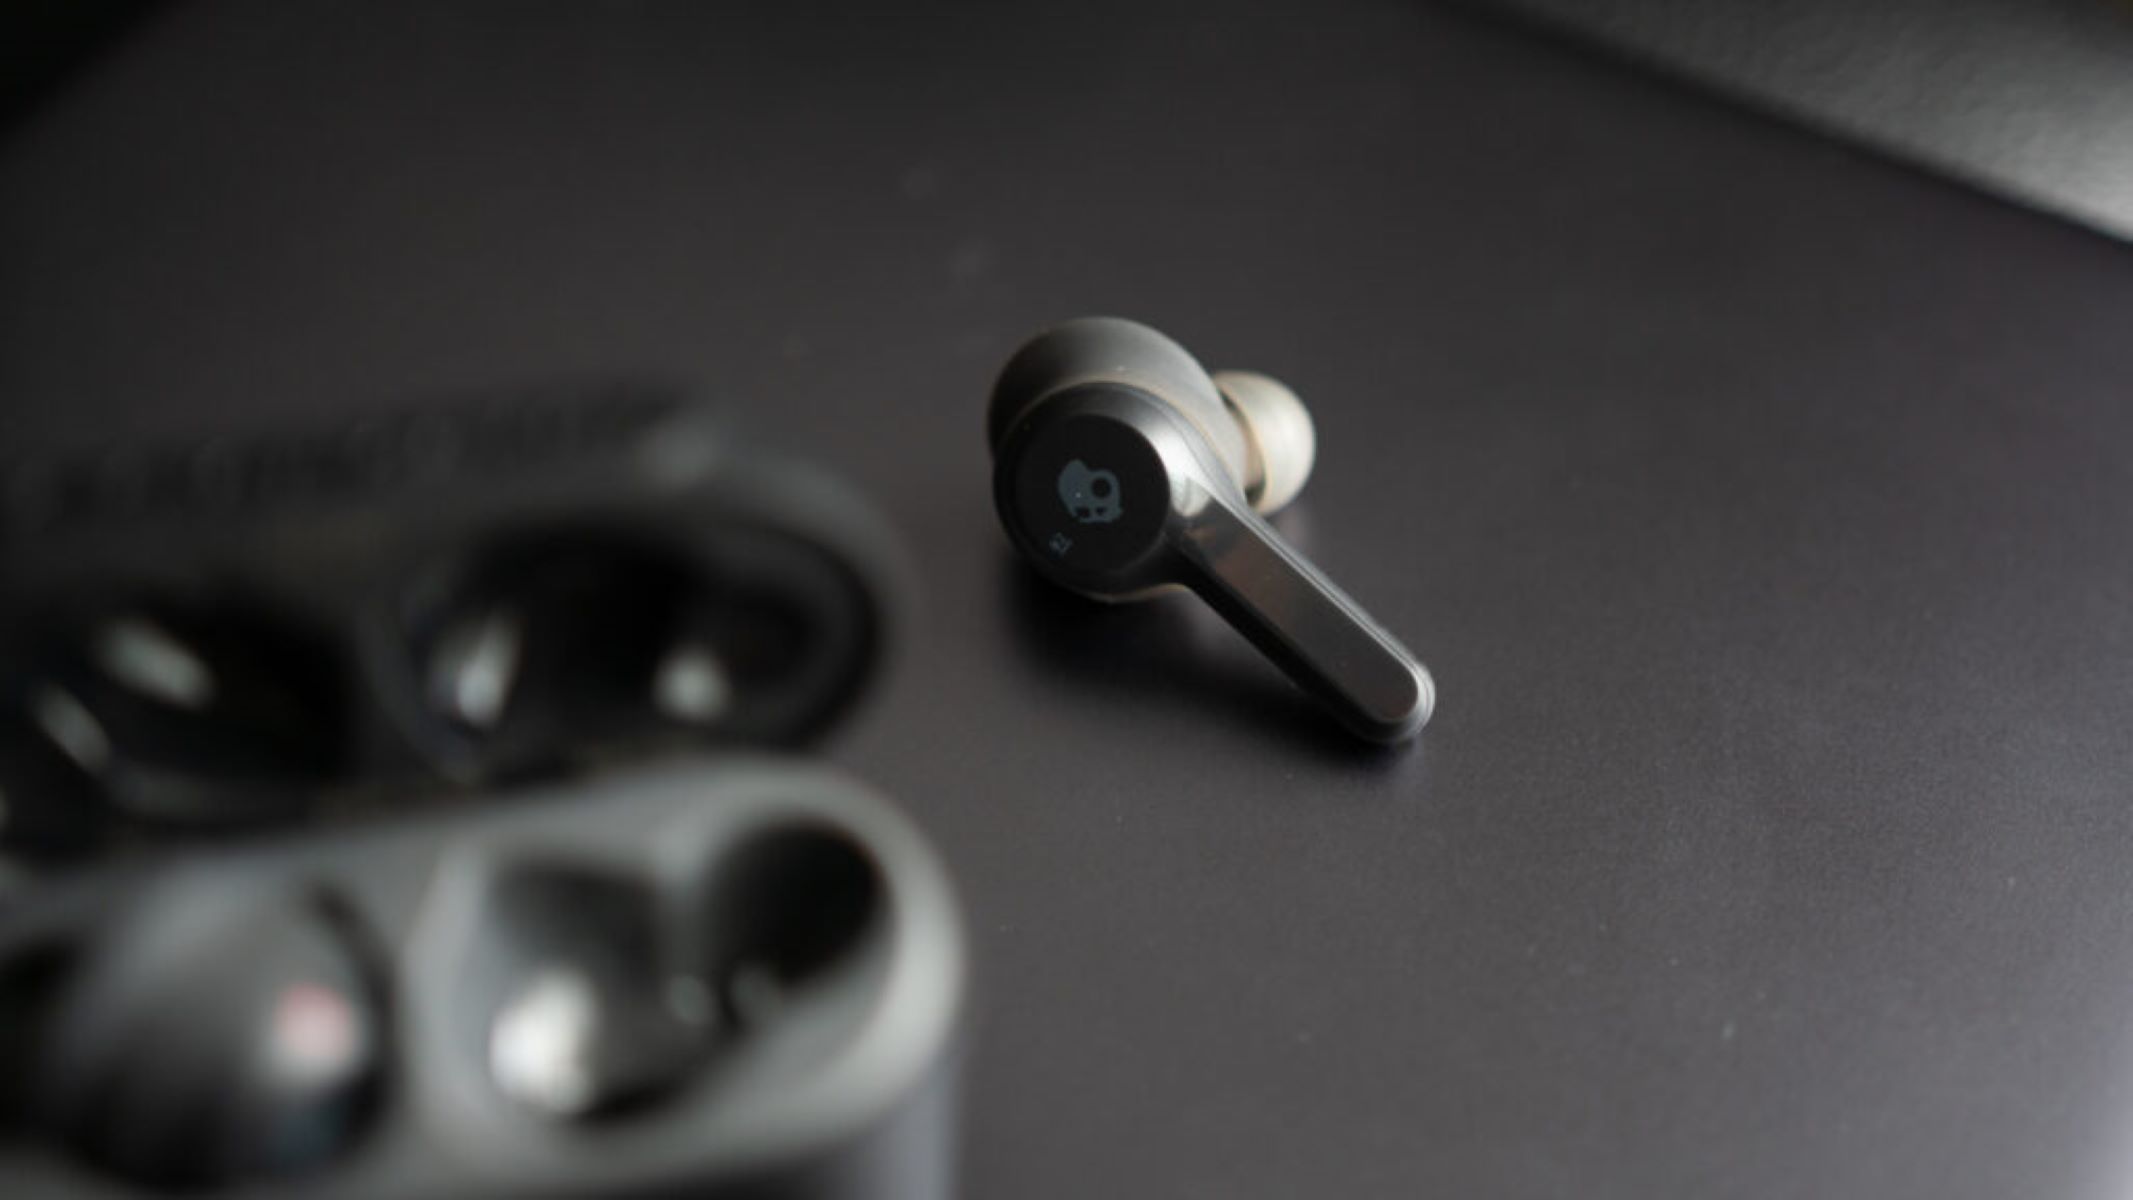 How To Connect Skullcandy Wireless Earbuds